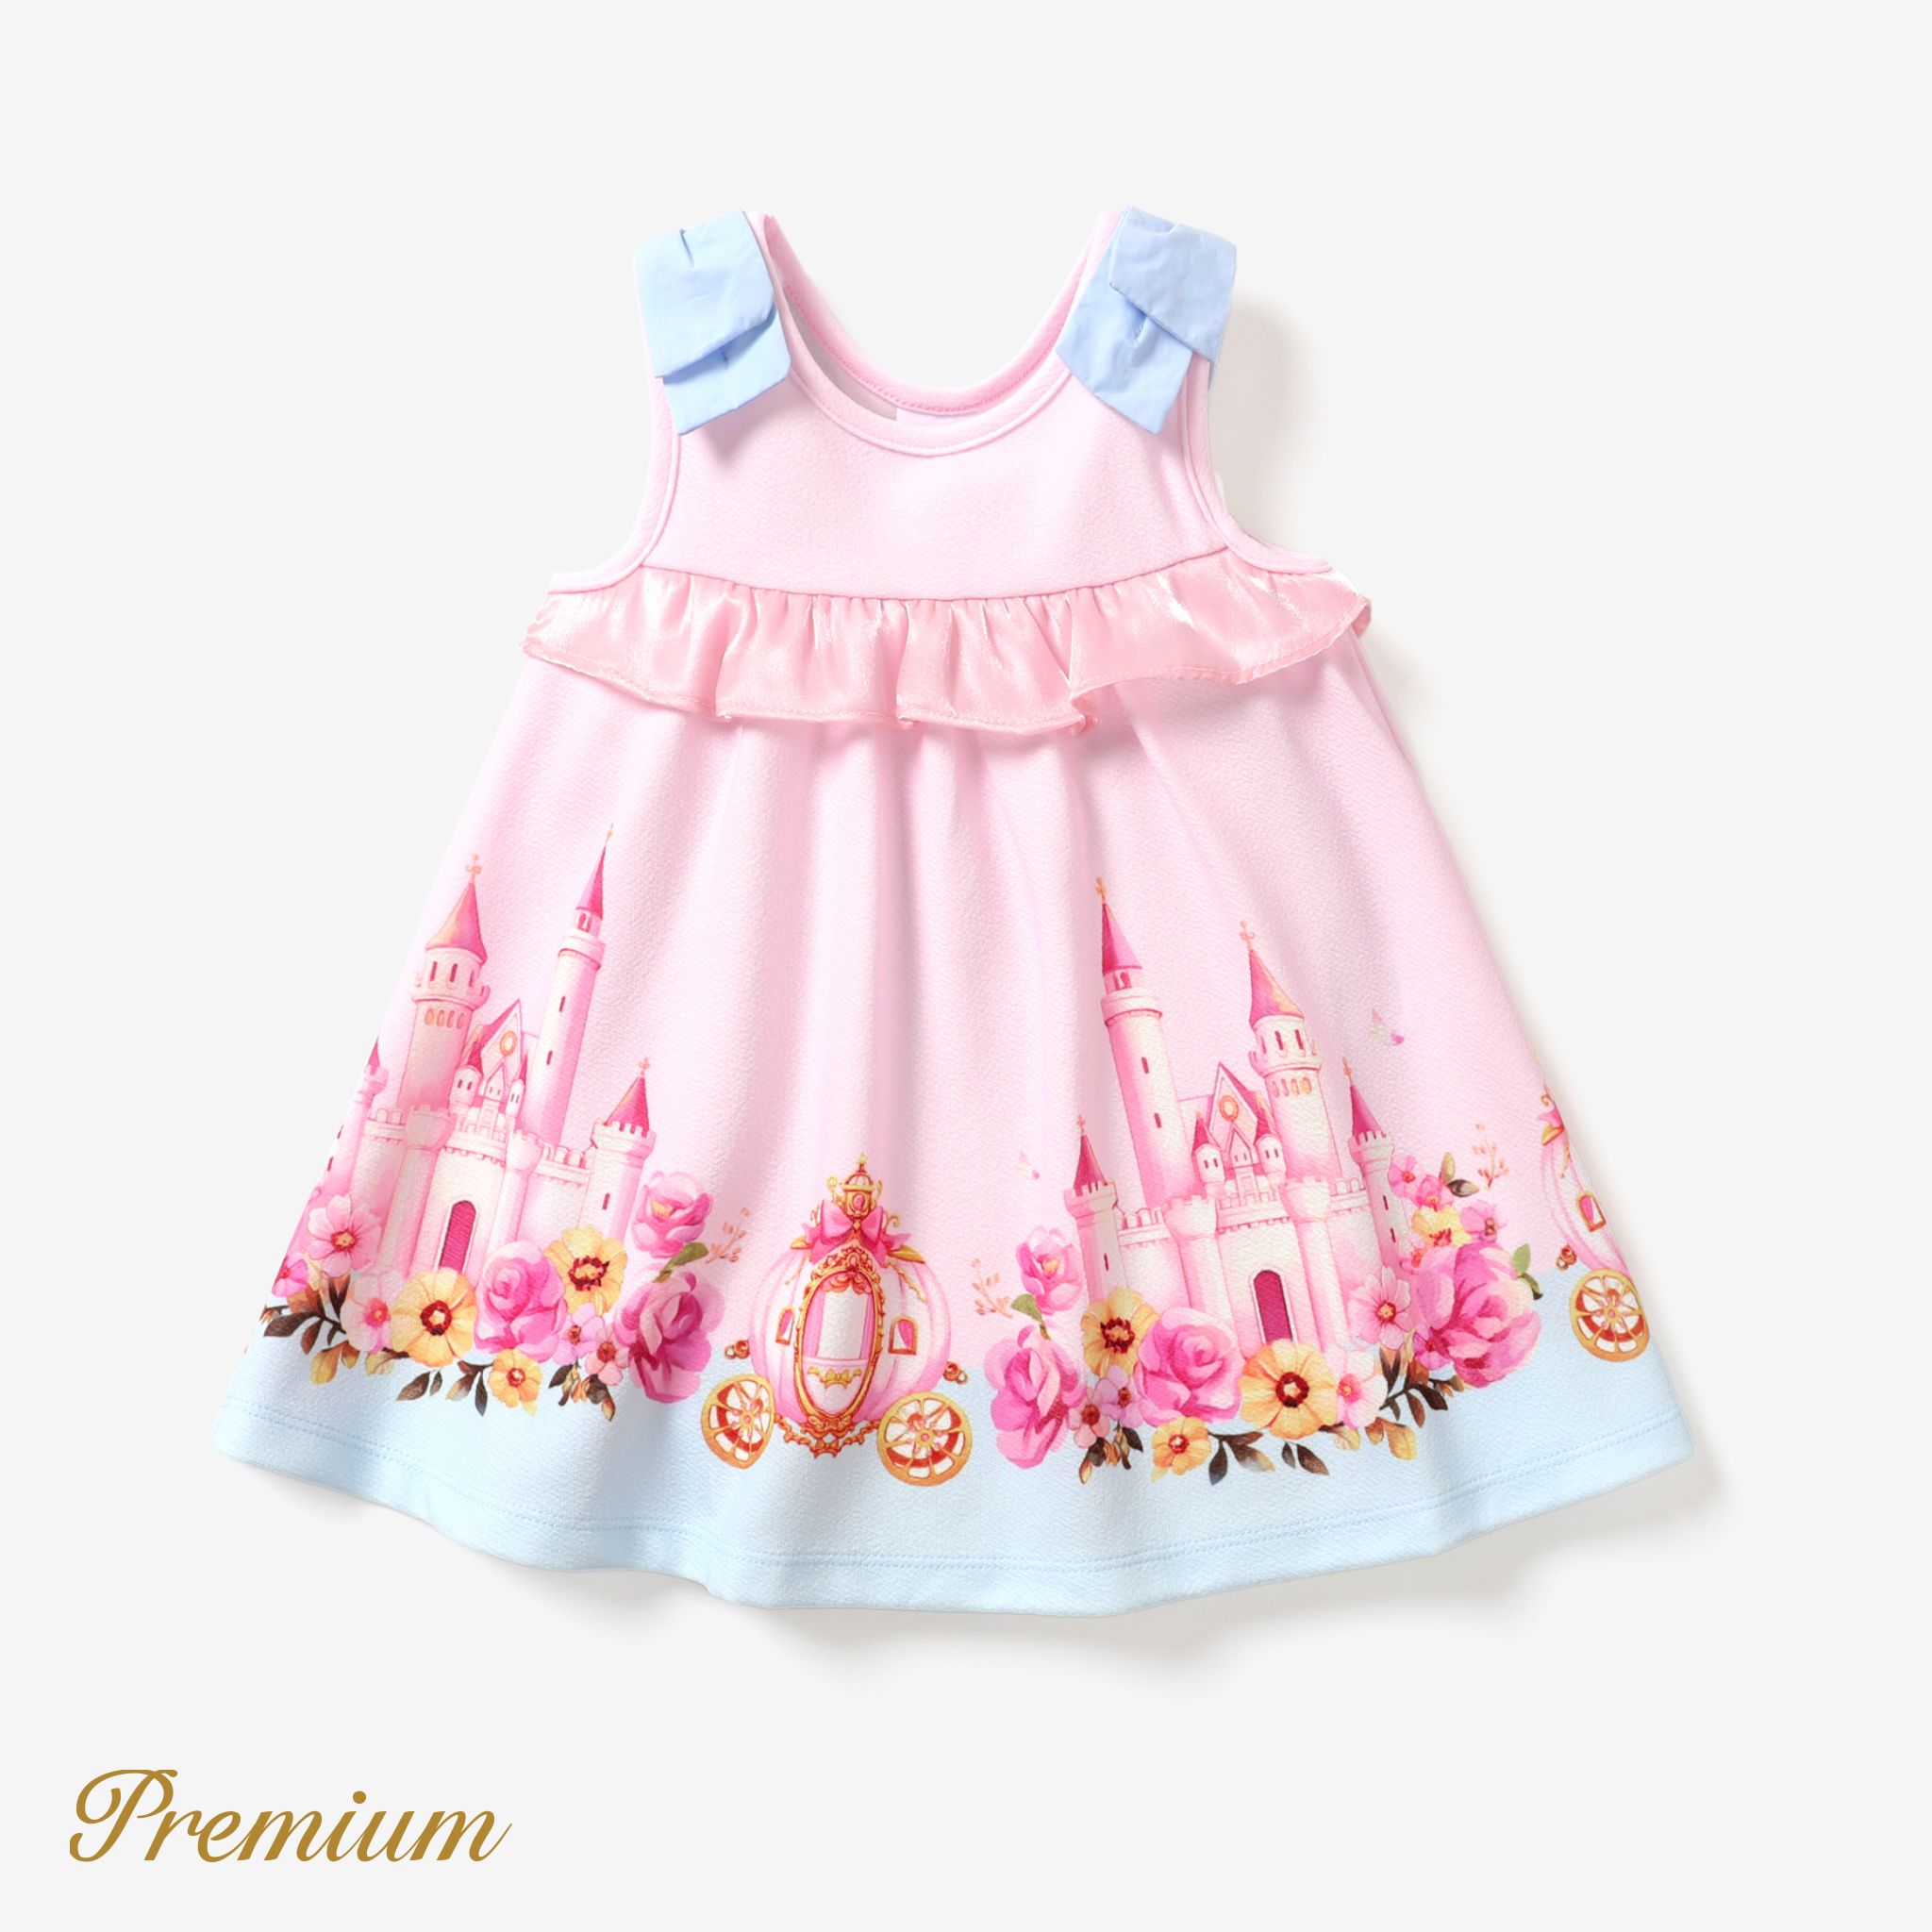 Baby Girl Elegant Floral Dress With Ruffle Edge